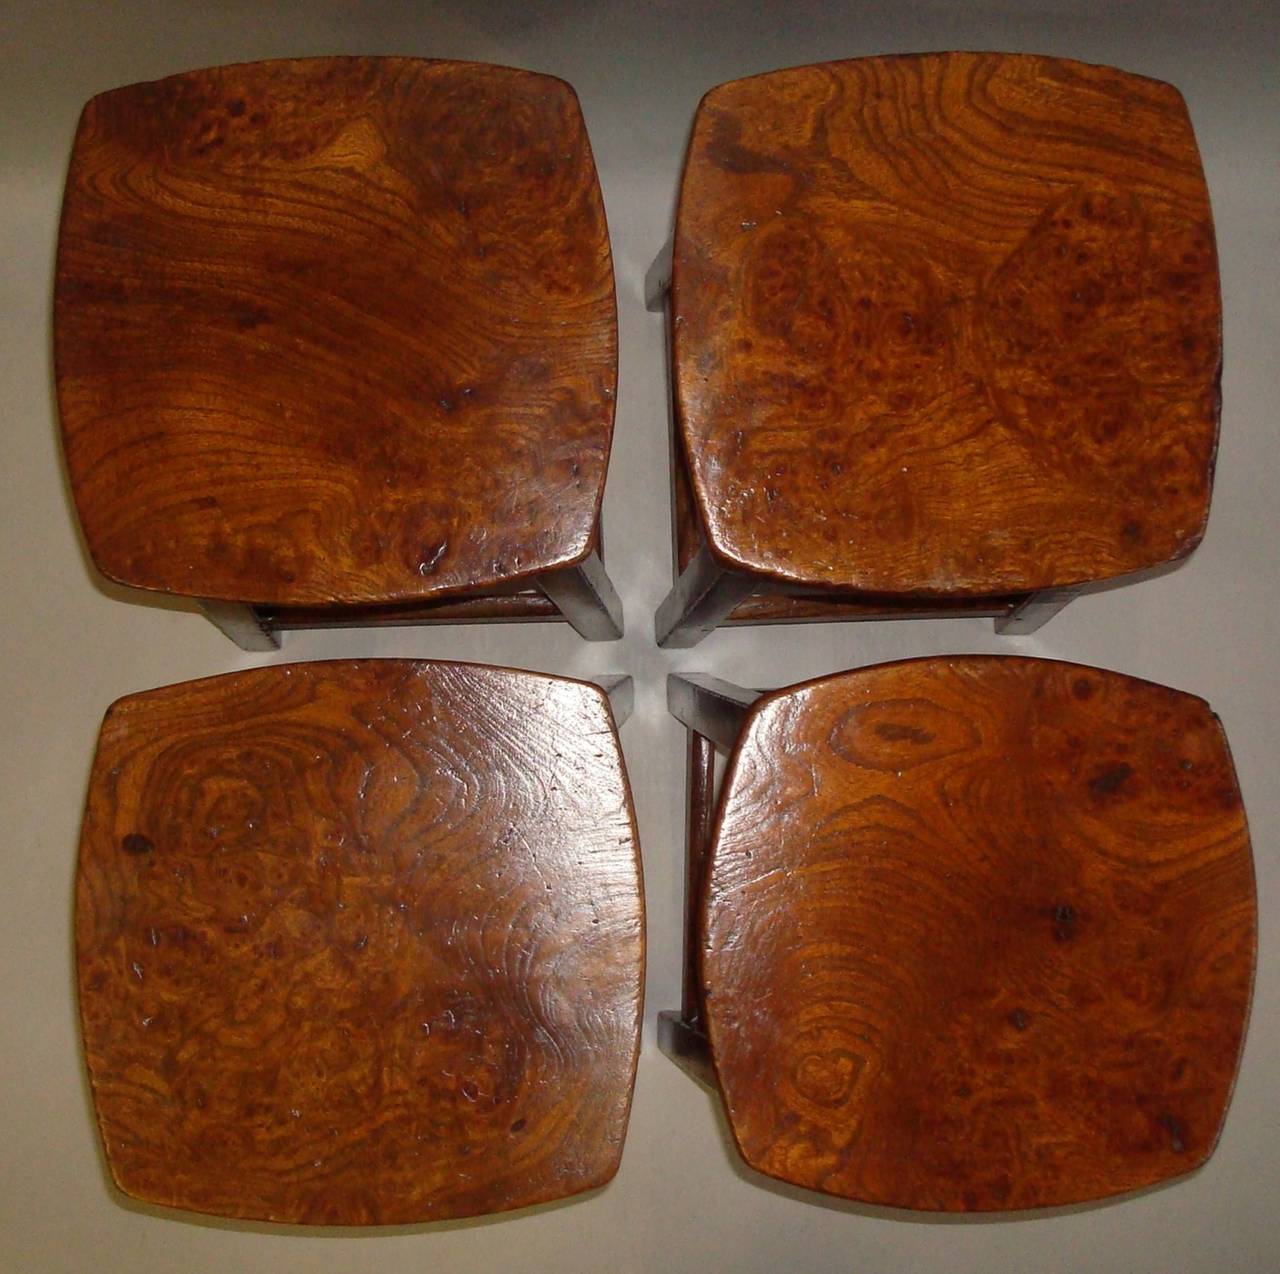 Late Georgian set of four burr elm and oak stools; the burr elm square tops with curved sides raised on oak bases with plain aprons, the four square tapering legs joined by traditional stretchers; of pegged construction.  Excellent colour and patina.